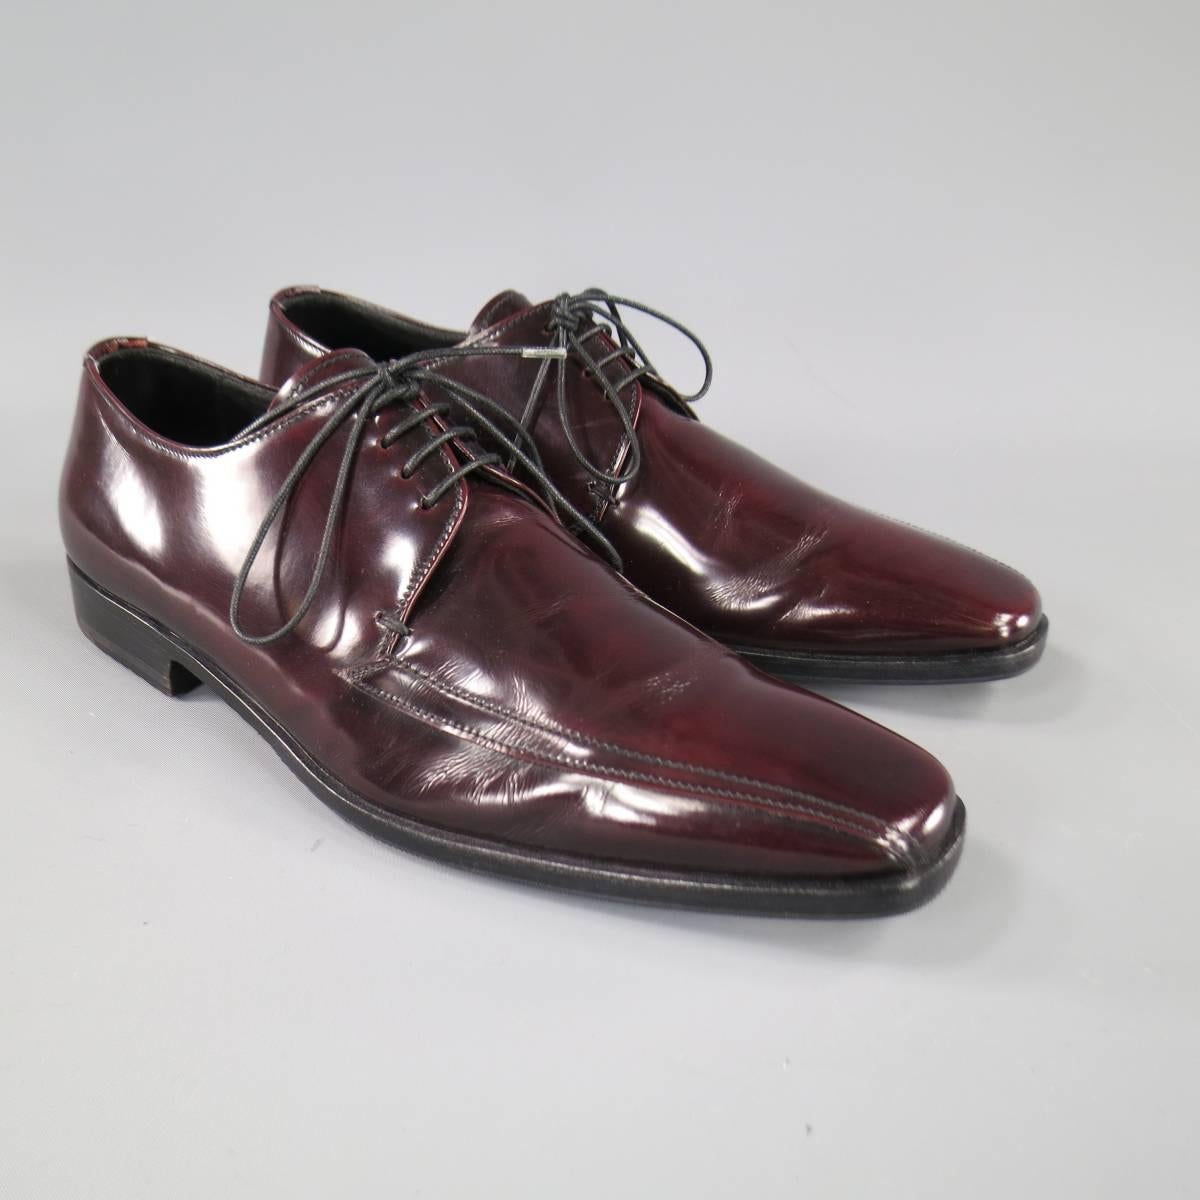 Men's PRADA Size 8 Burgundy Patent Leather Pointed Square Toe Lace Up